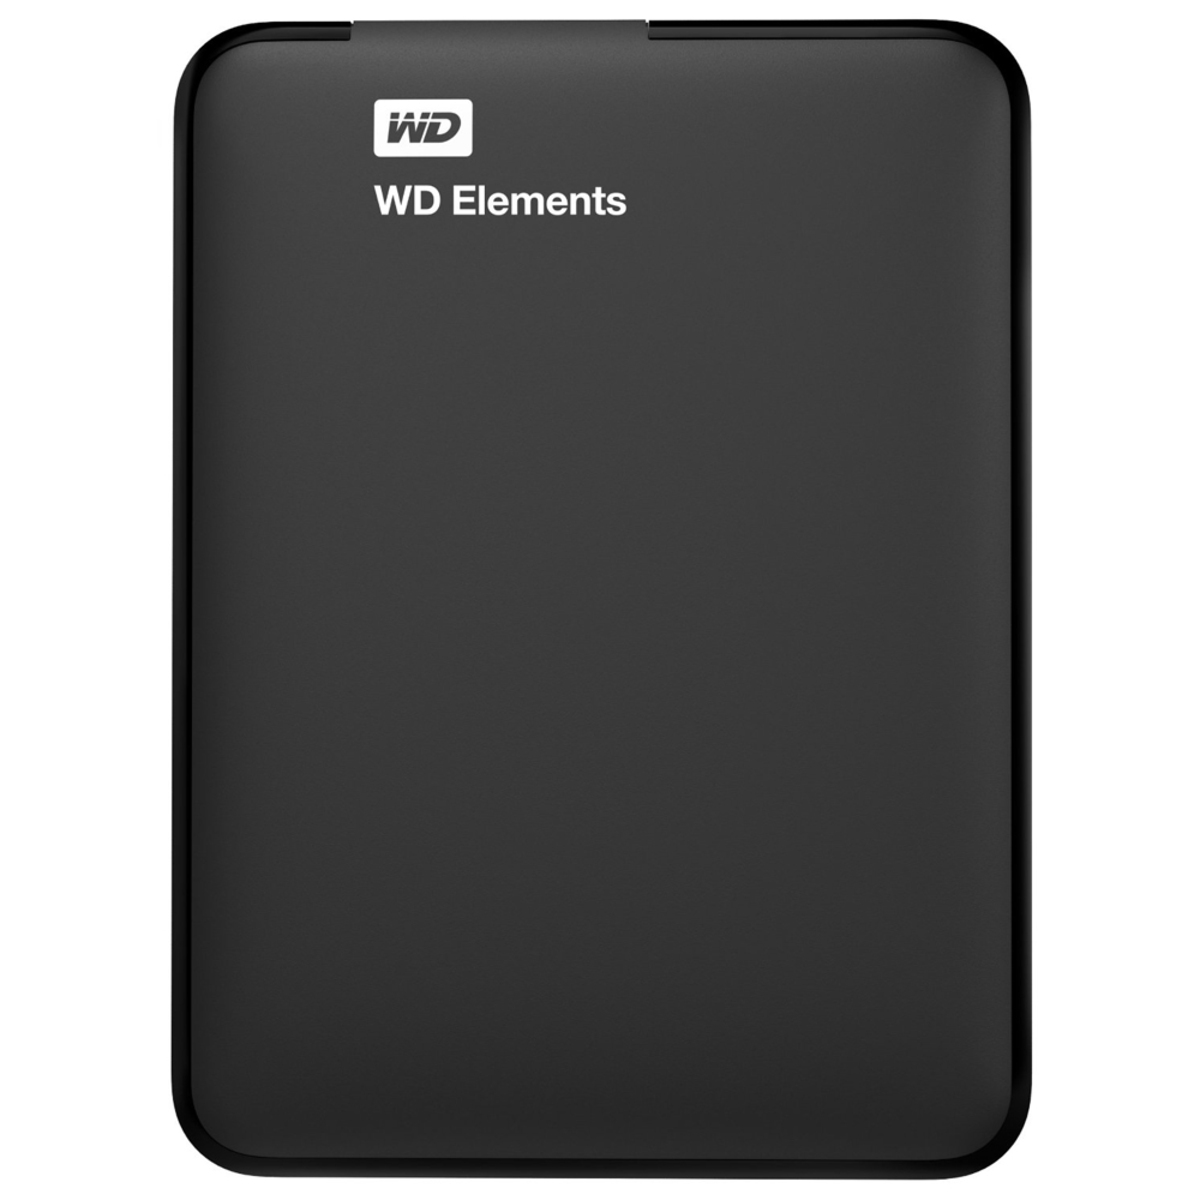 WD Elements 1 TB Wired External Hard Disk Features, Warranty and Capacity